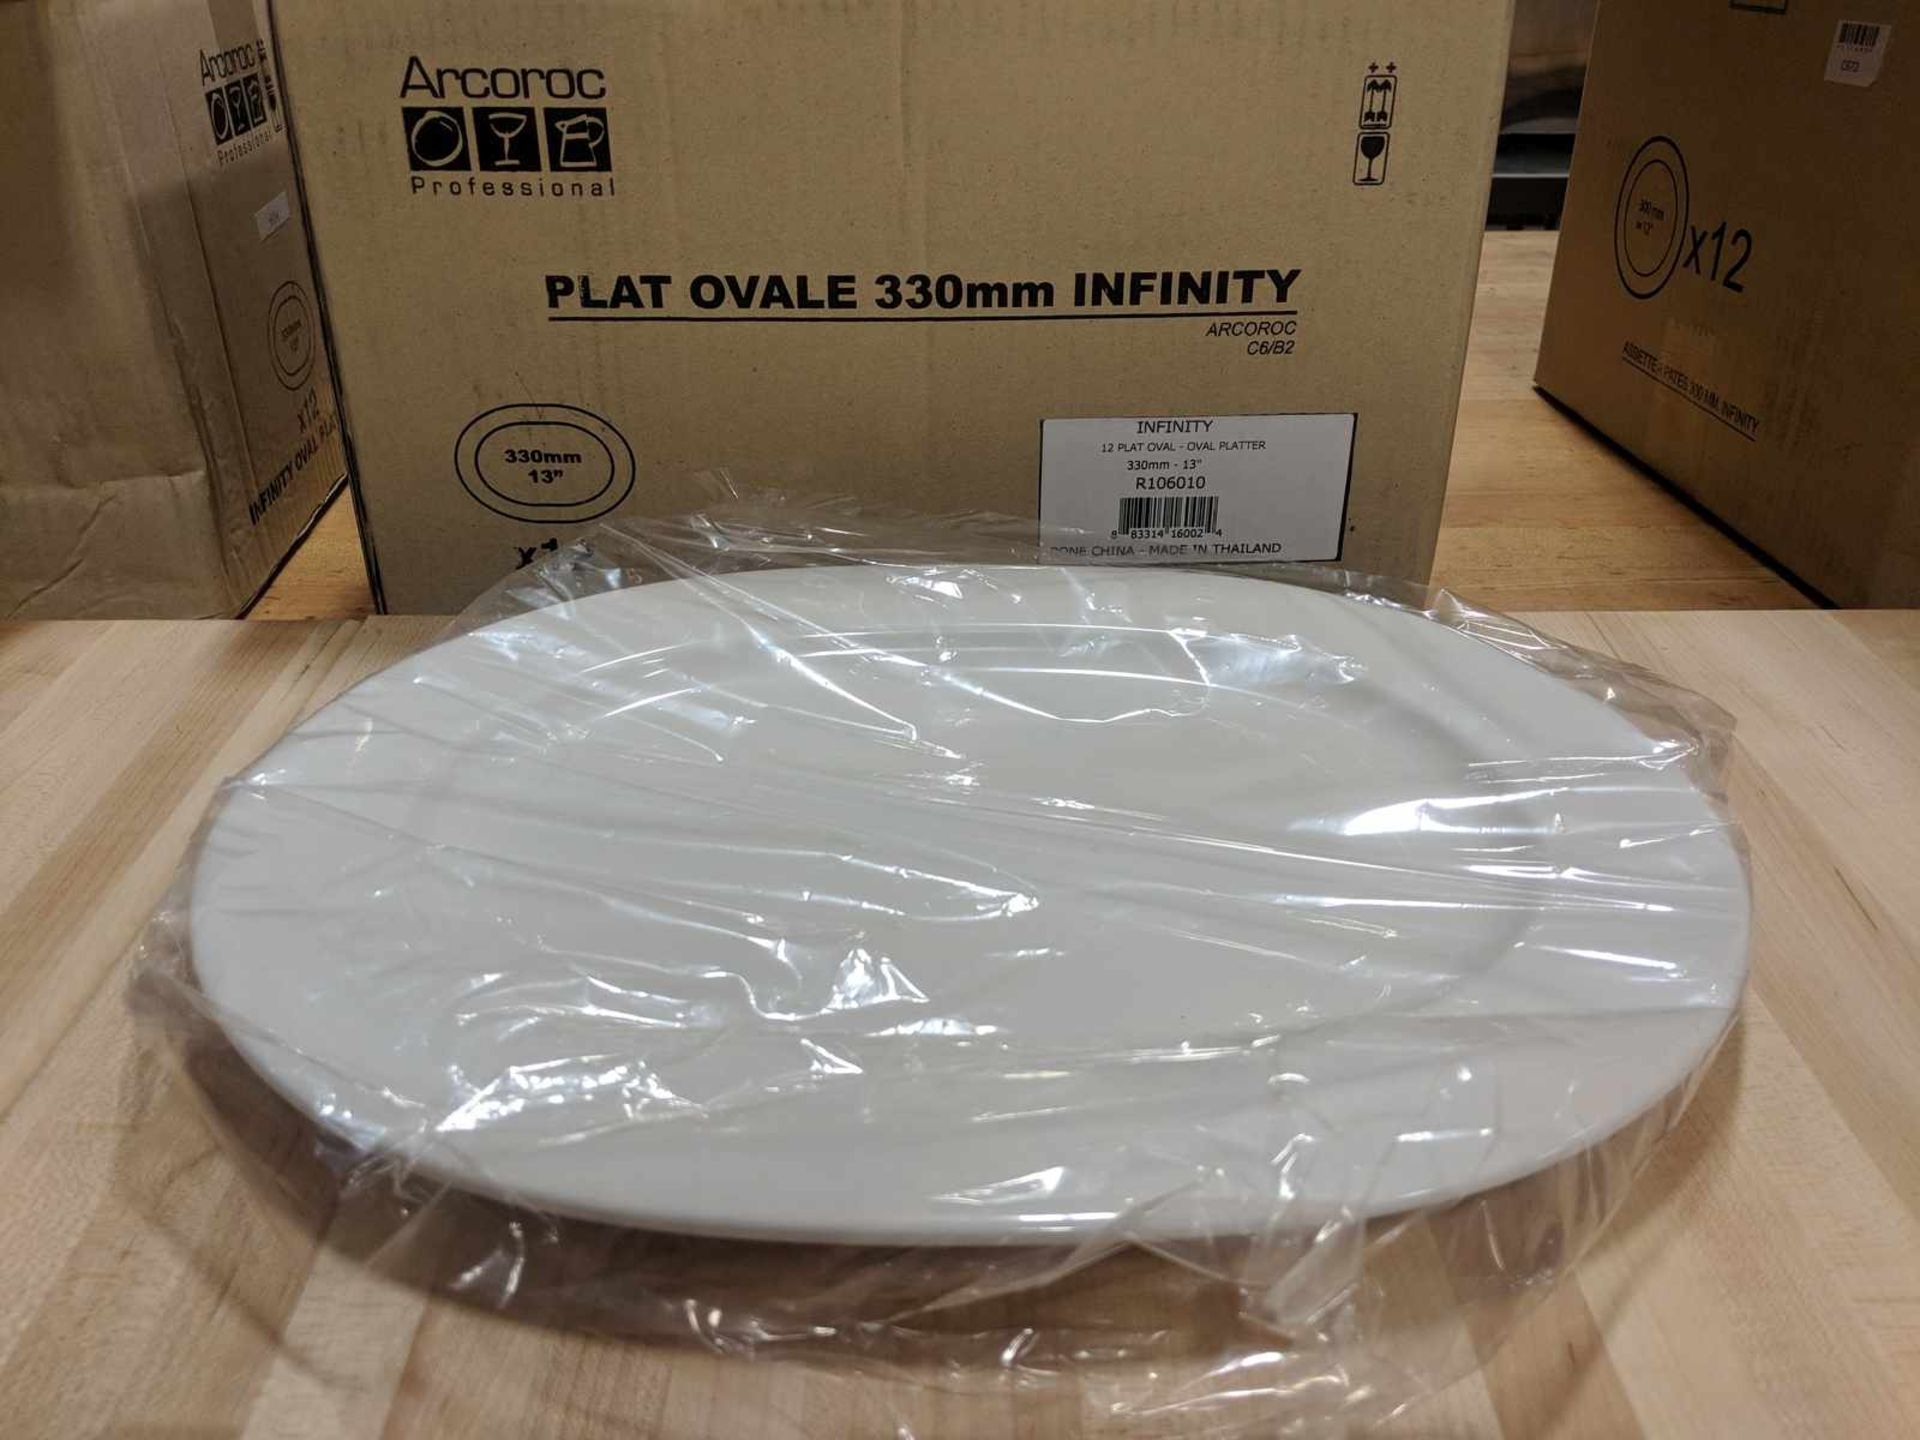 13" Infinity Oval Platters - Lot of 12 (1 Case), Arcoroc R1060 - Image 2 of 2